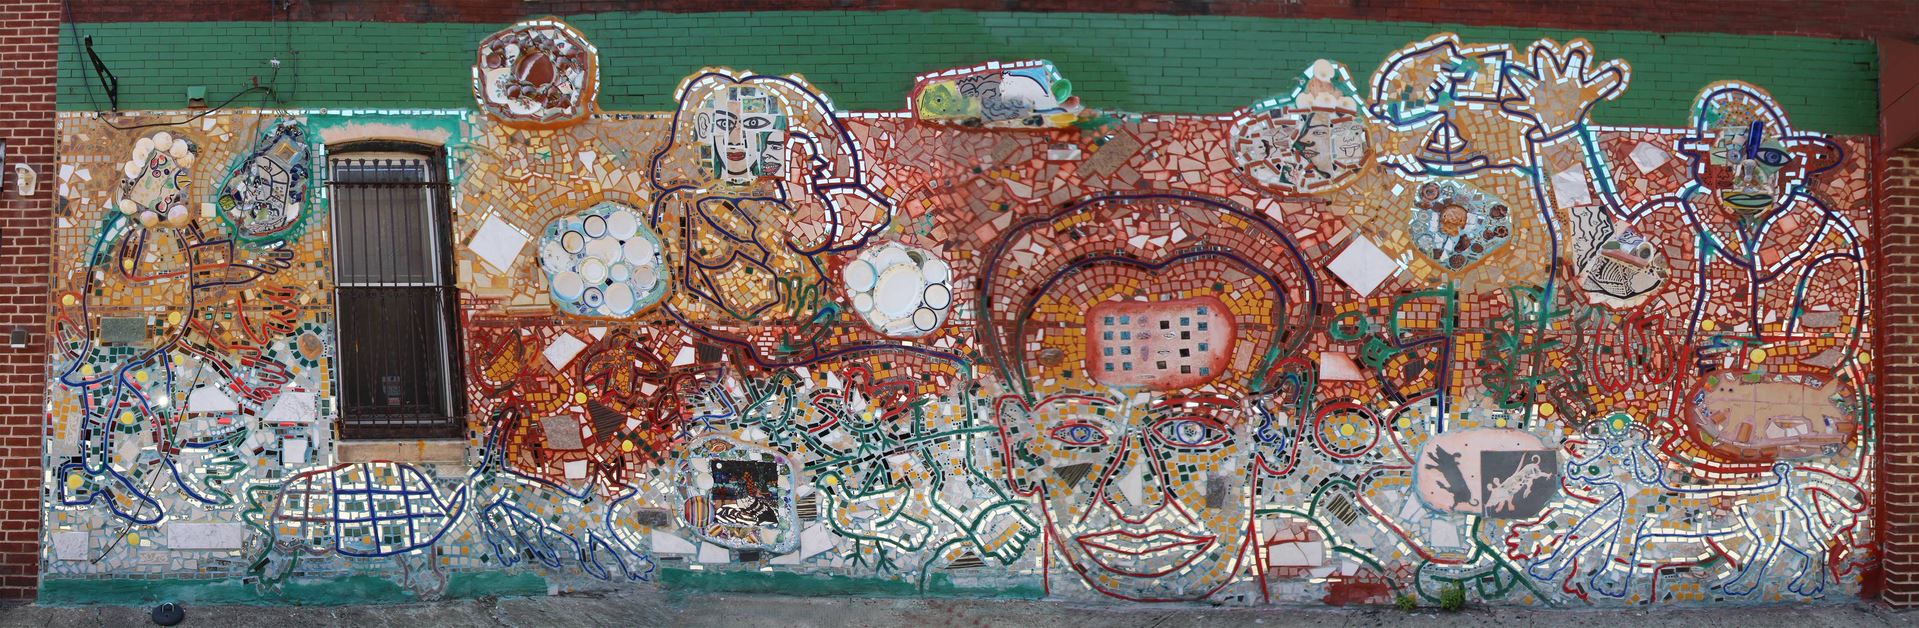 A horizontal image of a colorful mosaic mural by Isaiah Zagar. It features the outlines of people and animals, and uses primarily red and yellow grout.